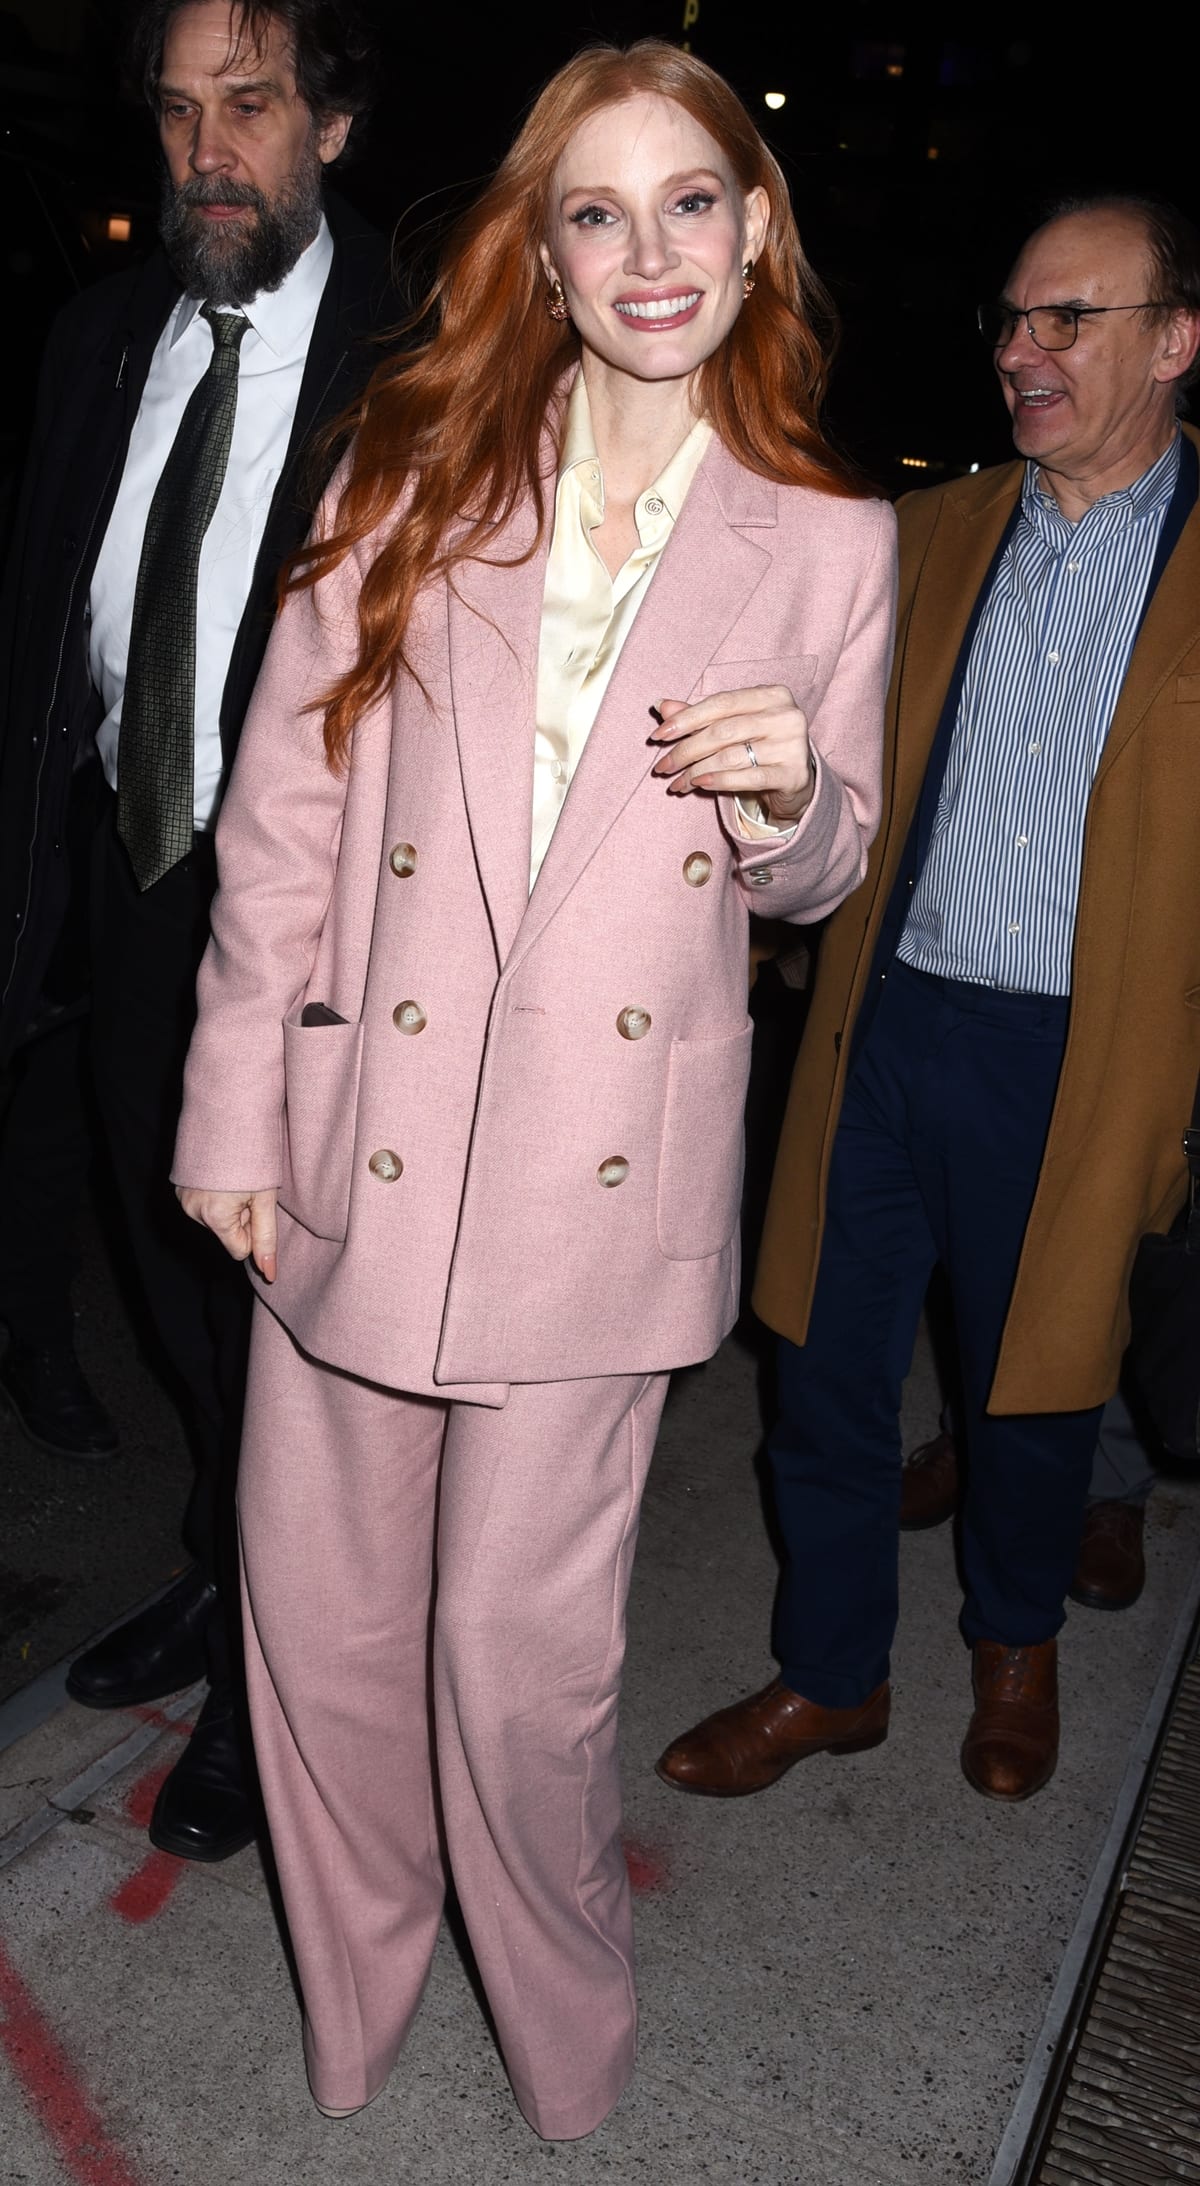 Jessica Chastain stood out in a stylish bright pink double-breasted jacket and slightly oversized pants in New York City